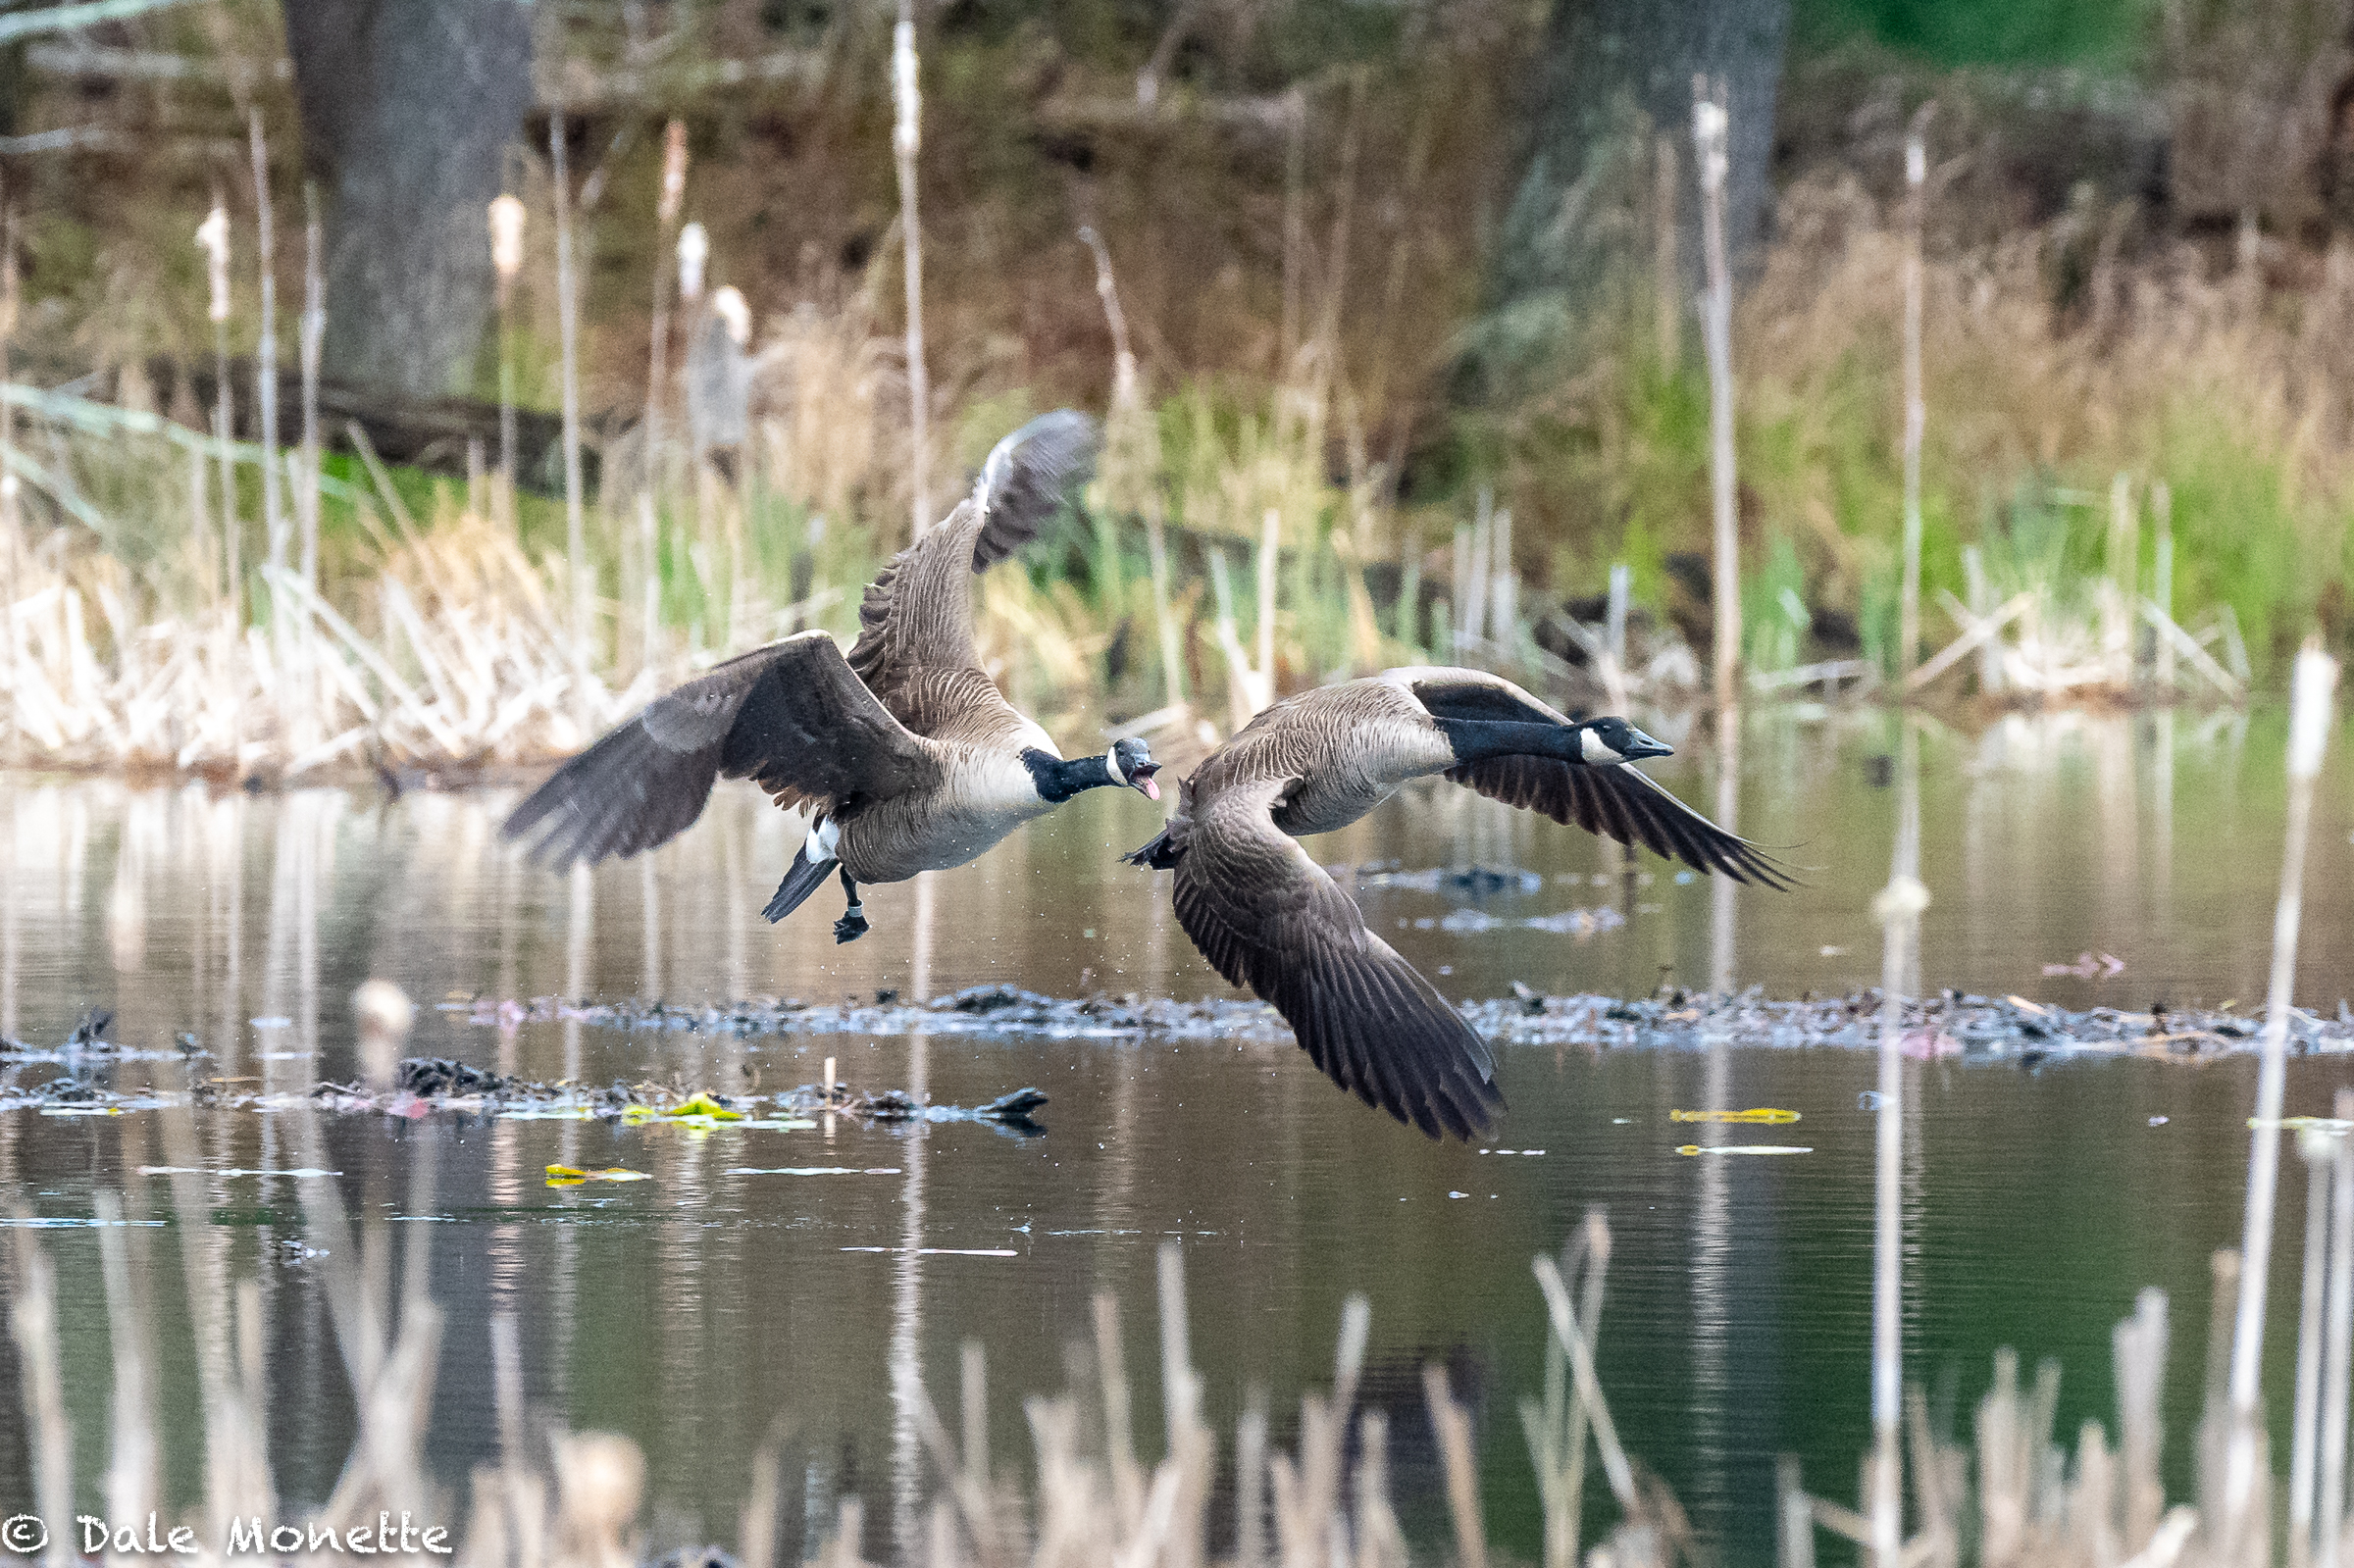   The male Canada goose defends his pond from another goose that dropped in.  What a bad idea on his part!    